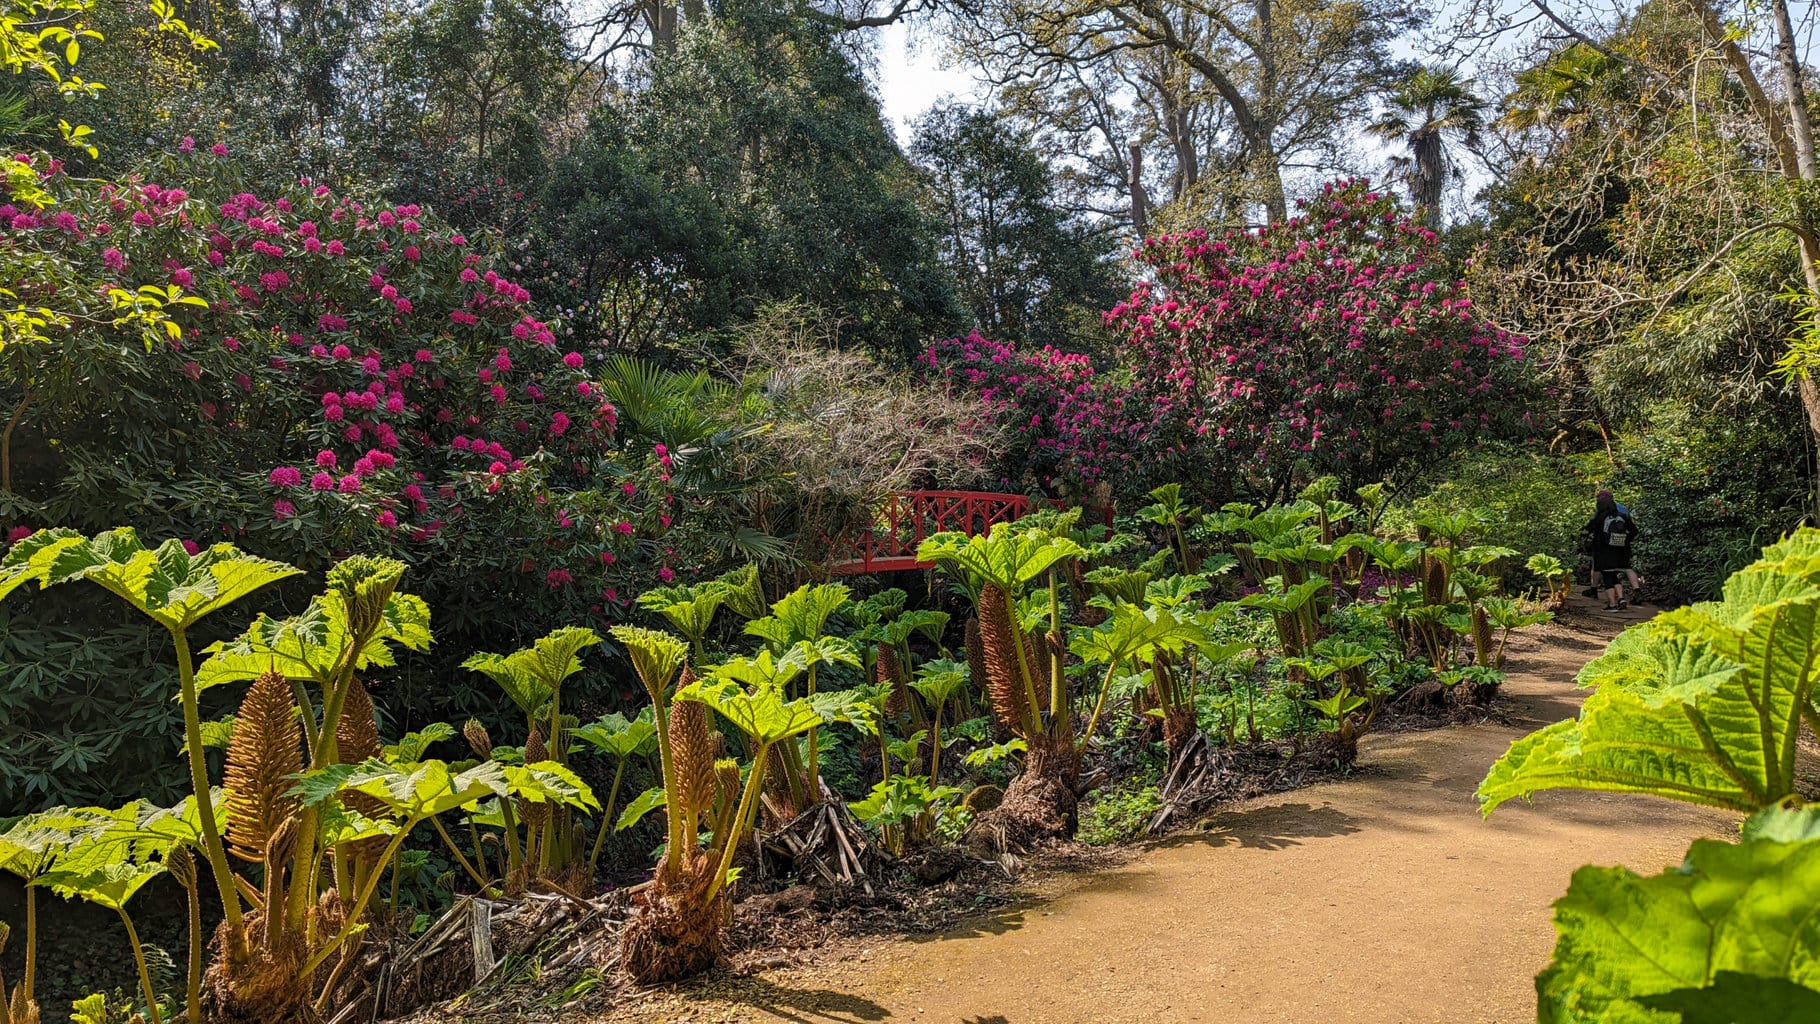 stone pathway leading between large green plants with big leaves with trees in the distance and a small red bridge between large pink rhododendron bushes at Abbotsbury Subtropical Gardens in Weymouth Dorset